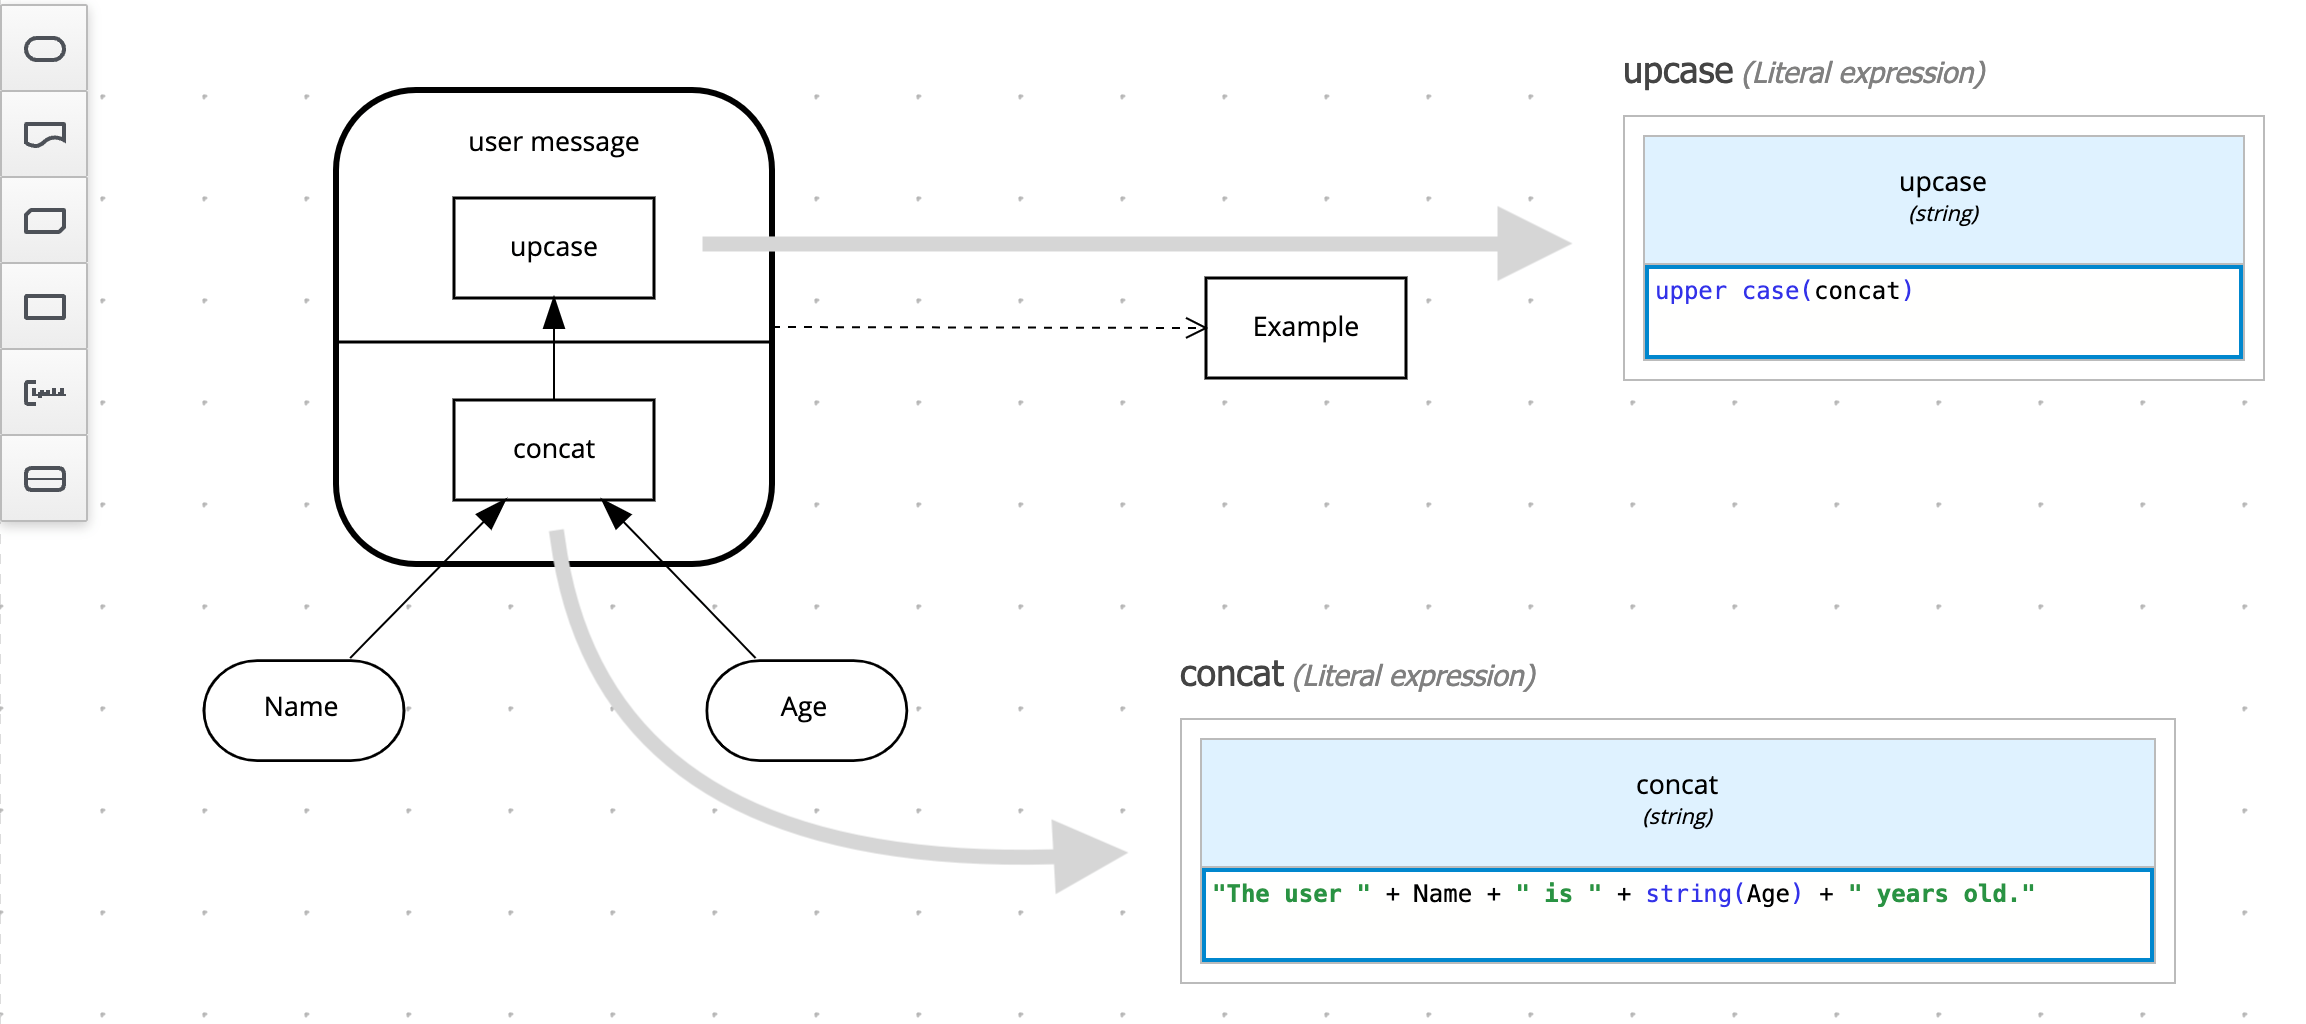 Example of DMN model with a decision service